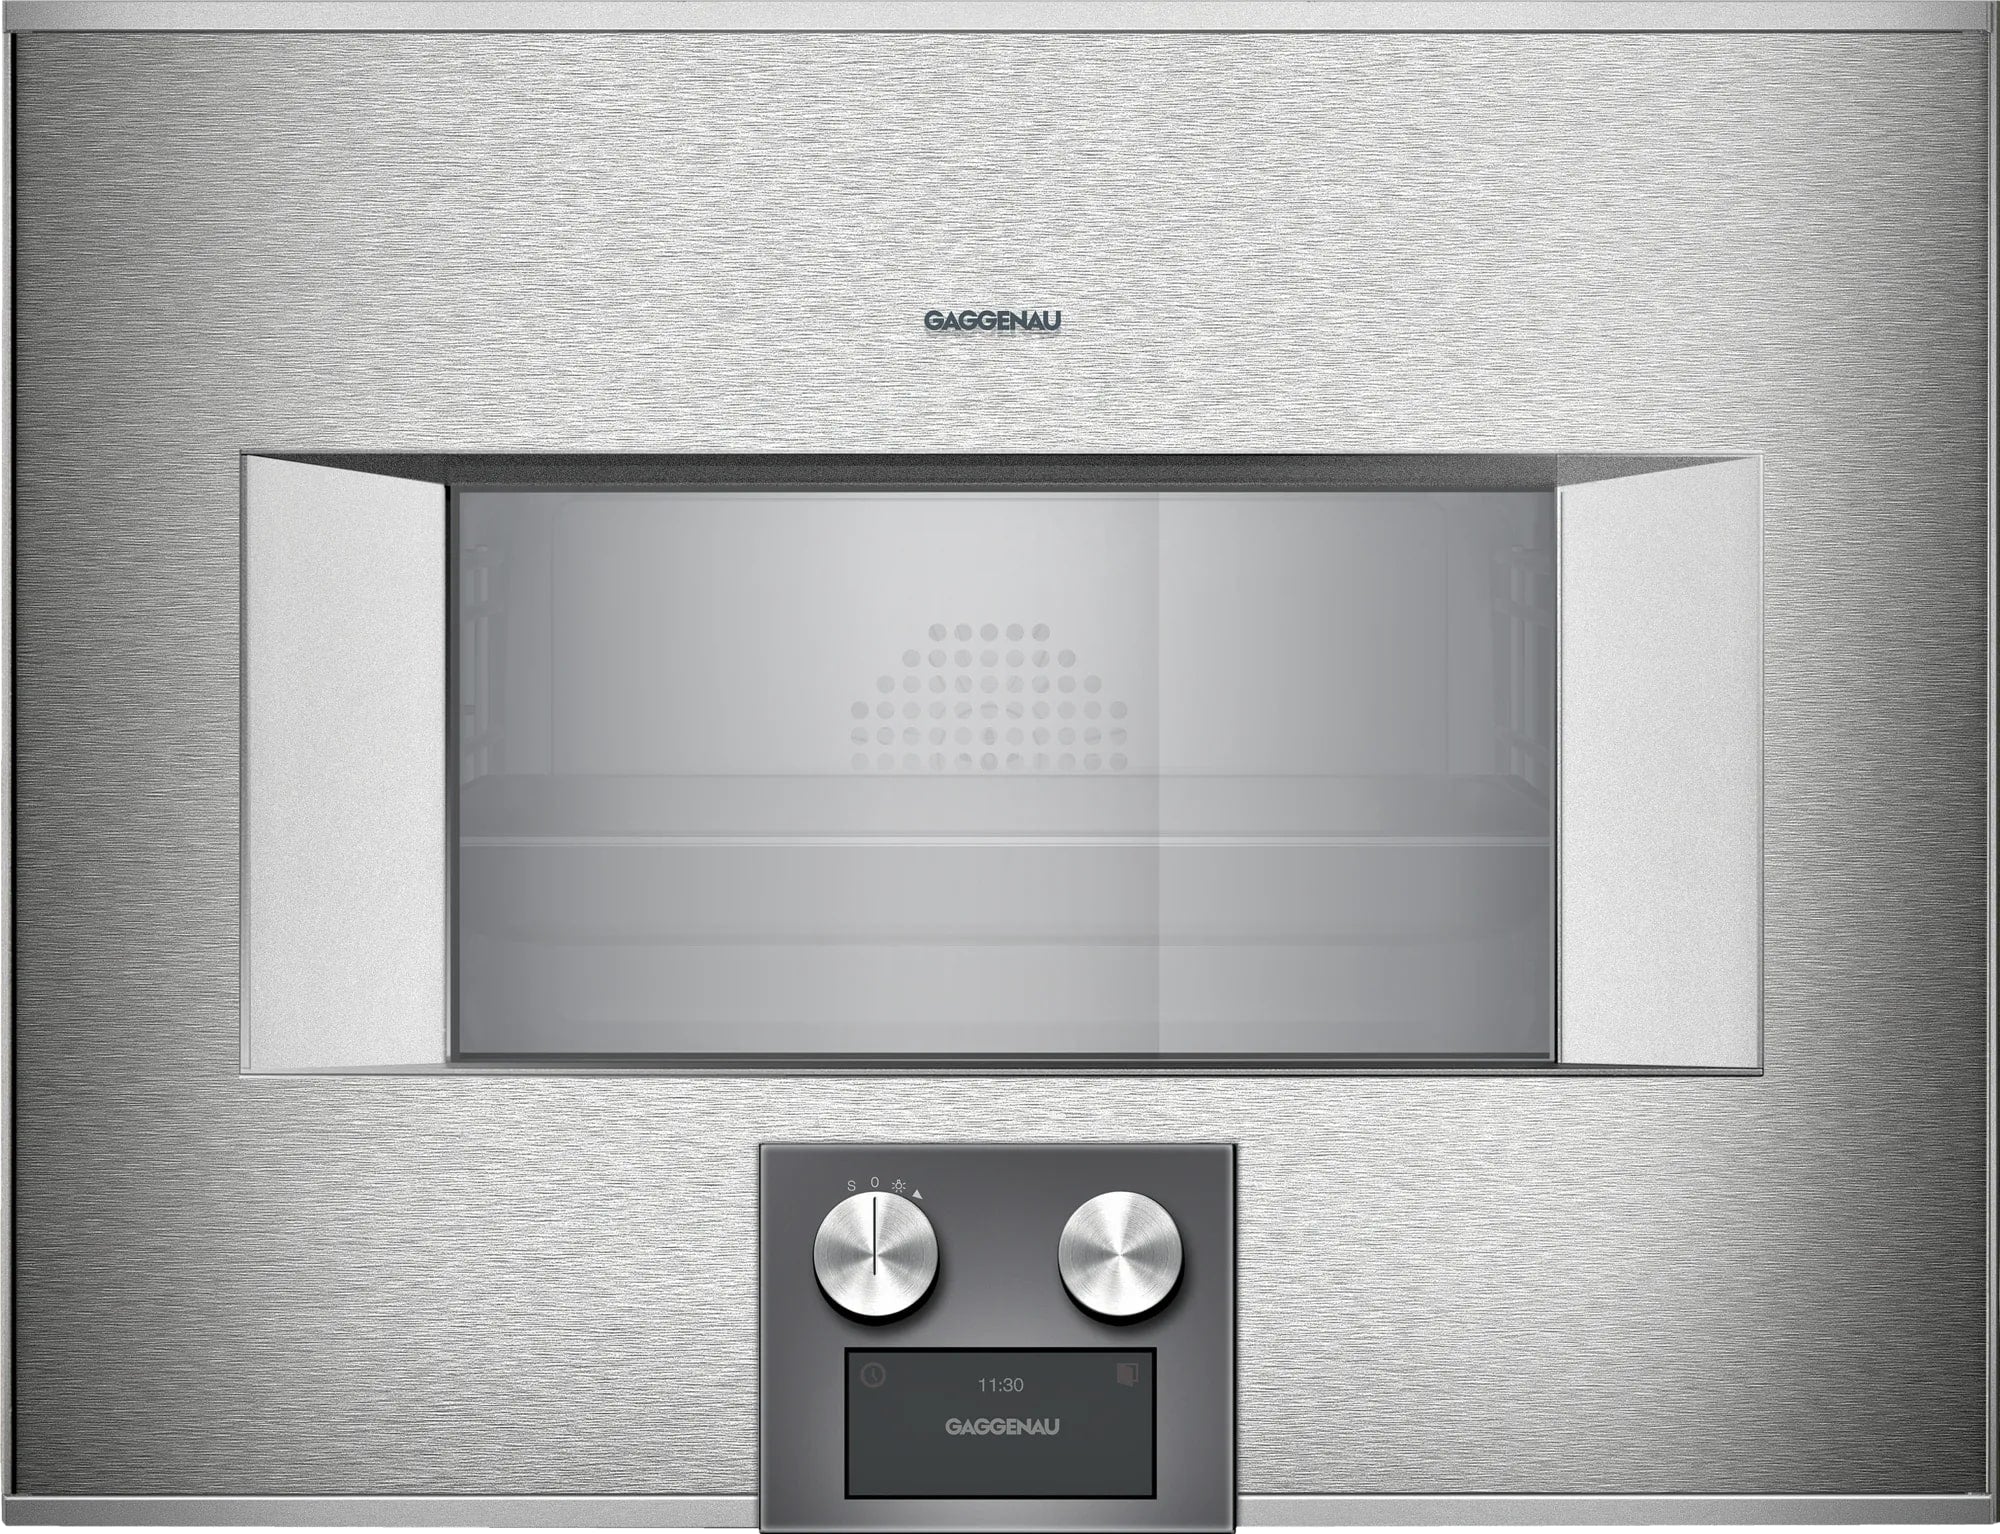 Gaggenau - 2.1 cu. ft Steam Wall Oven in Stainless - BS475612